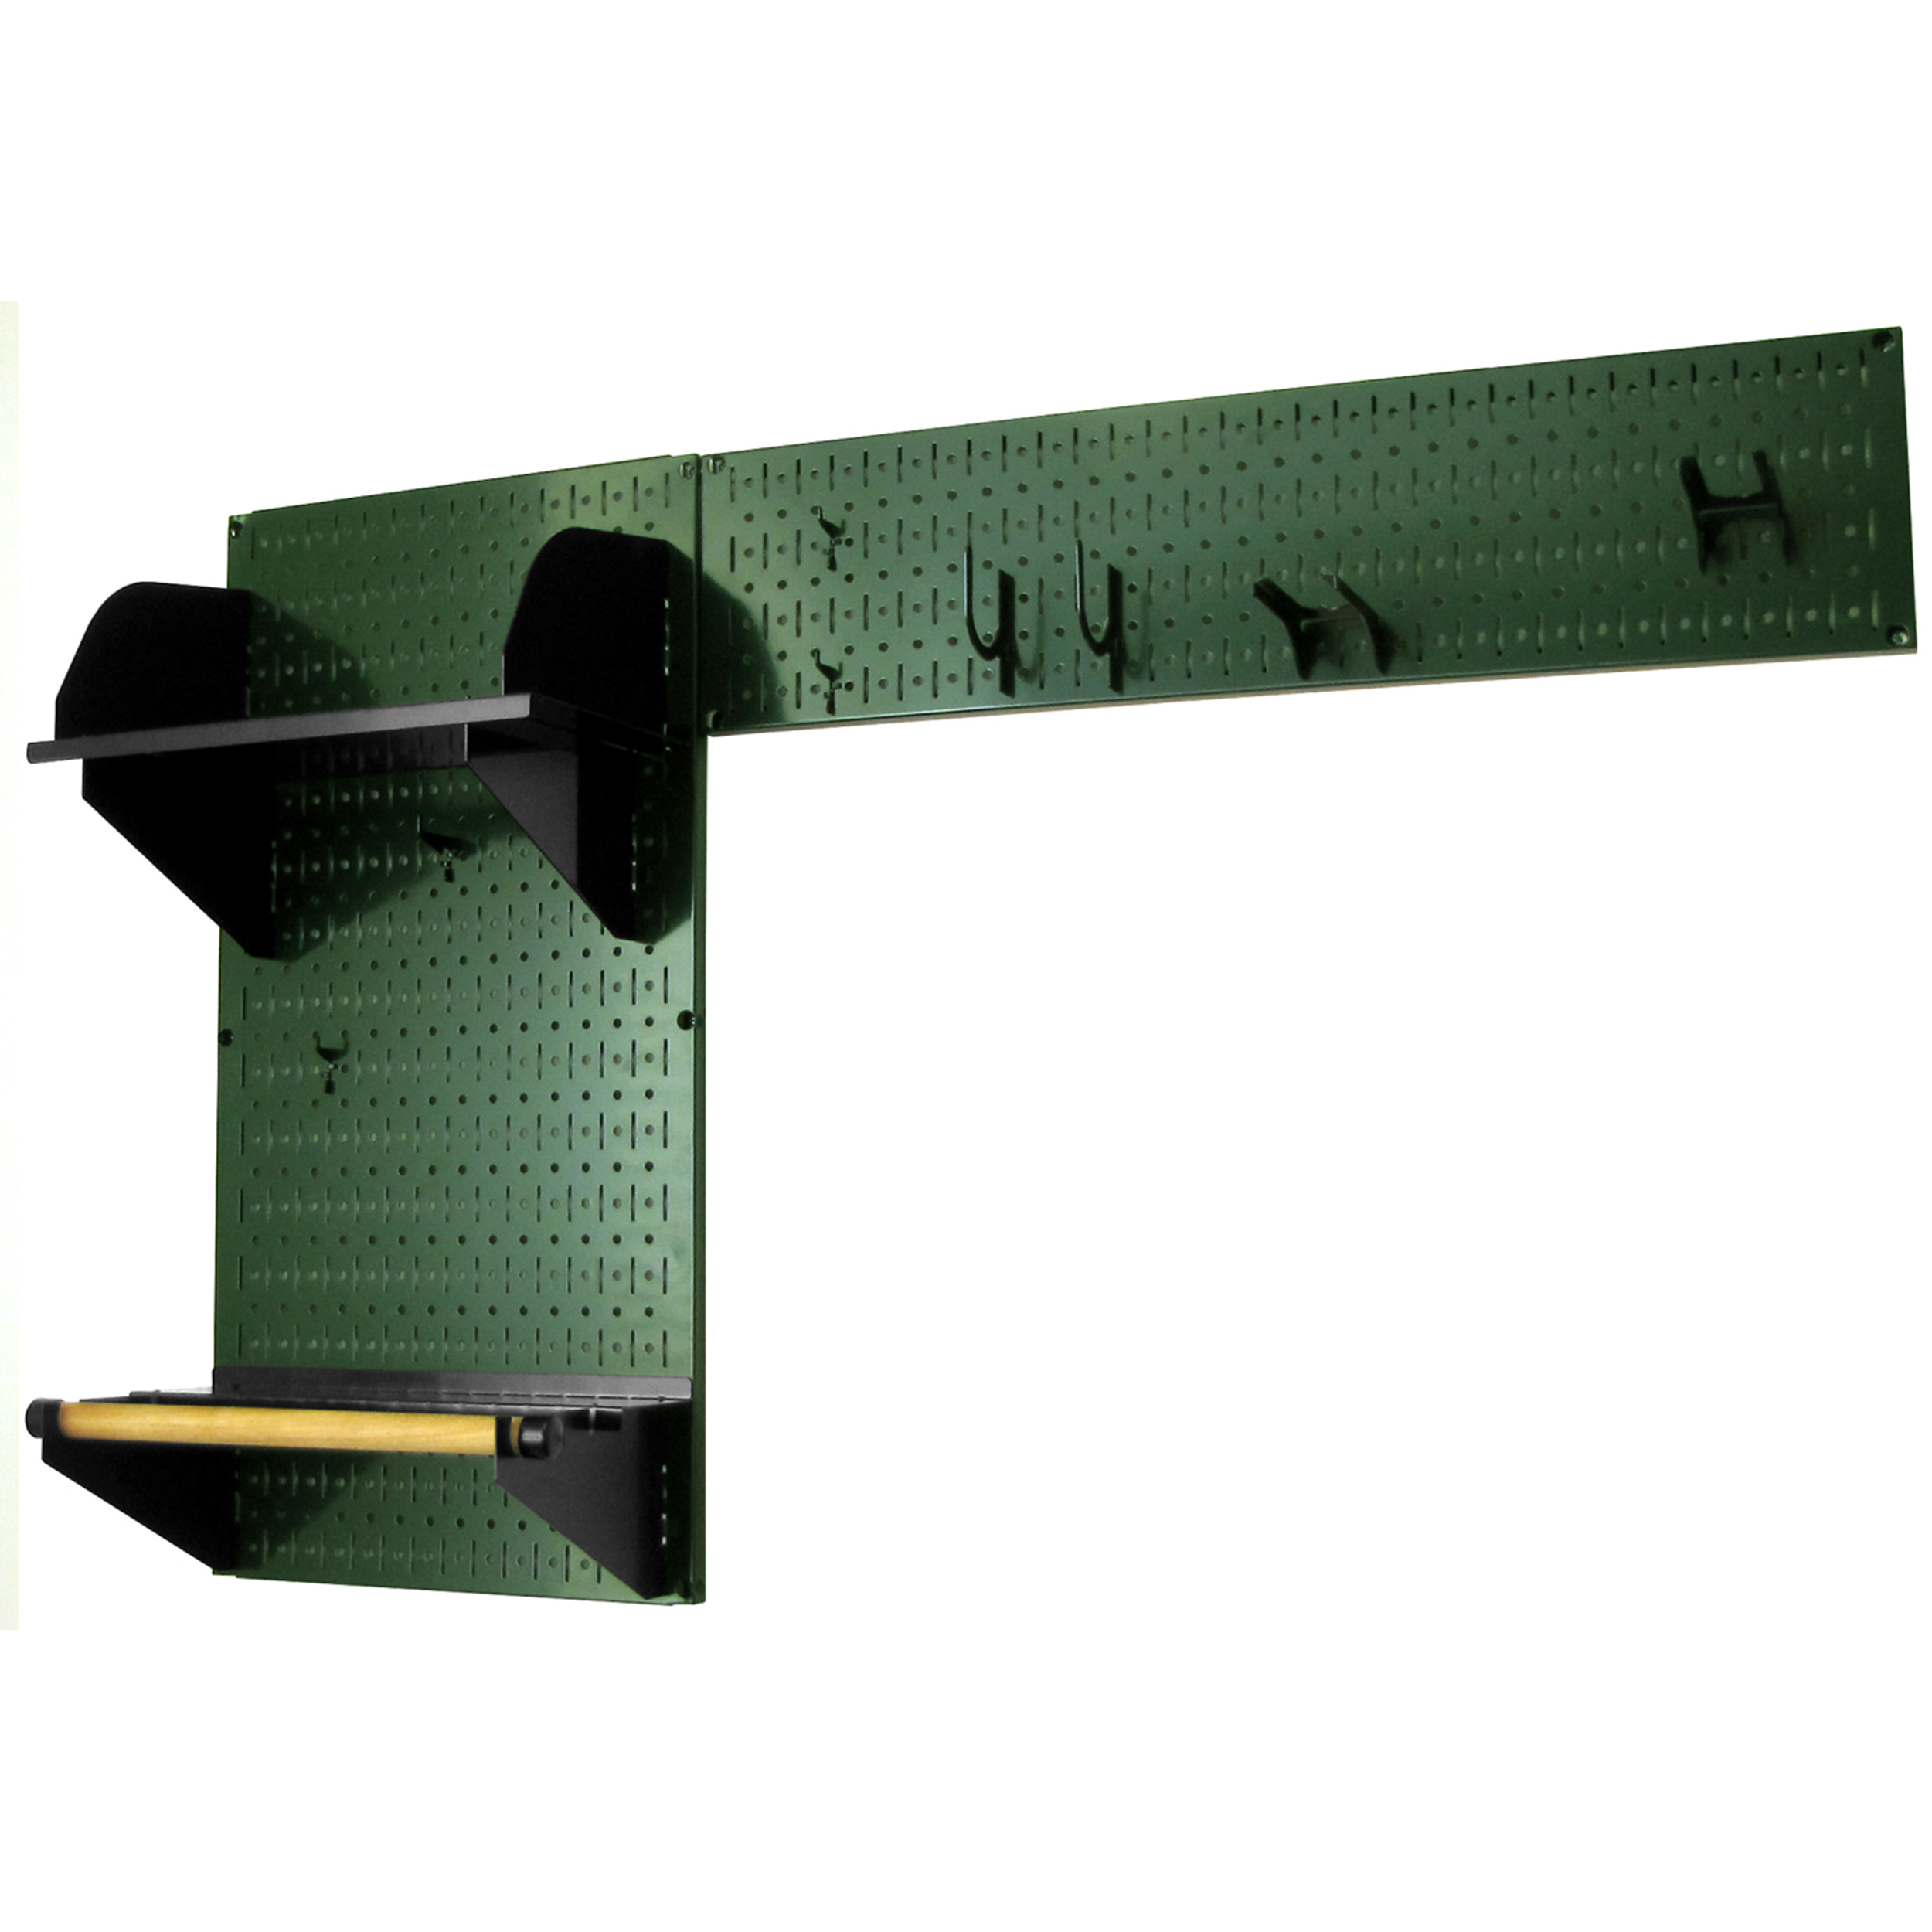 Pegboard Garden Tool Board Organizer With Green Pegboard And Black Accessories